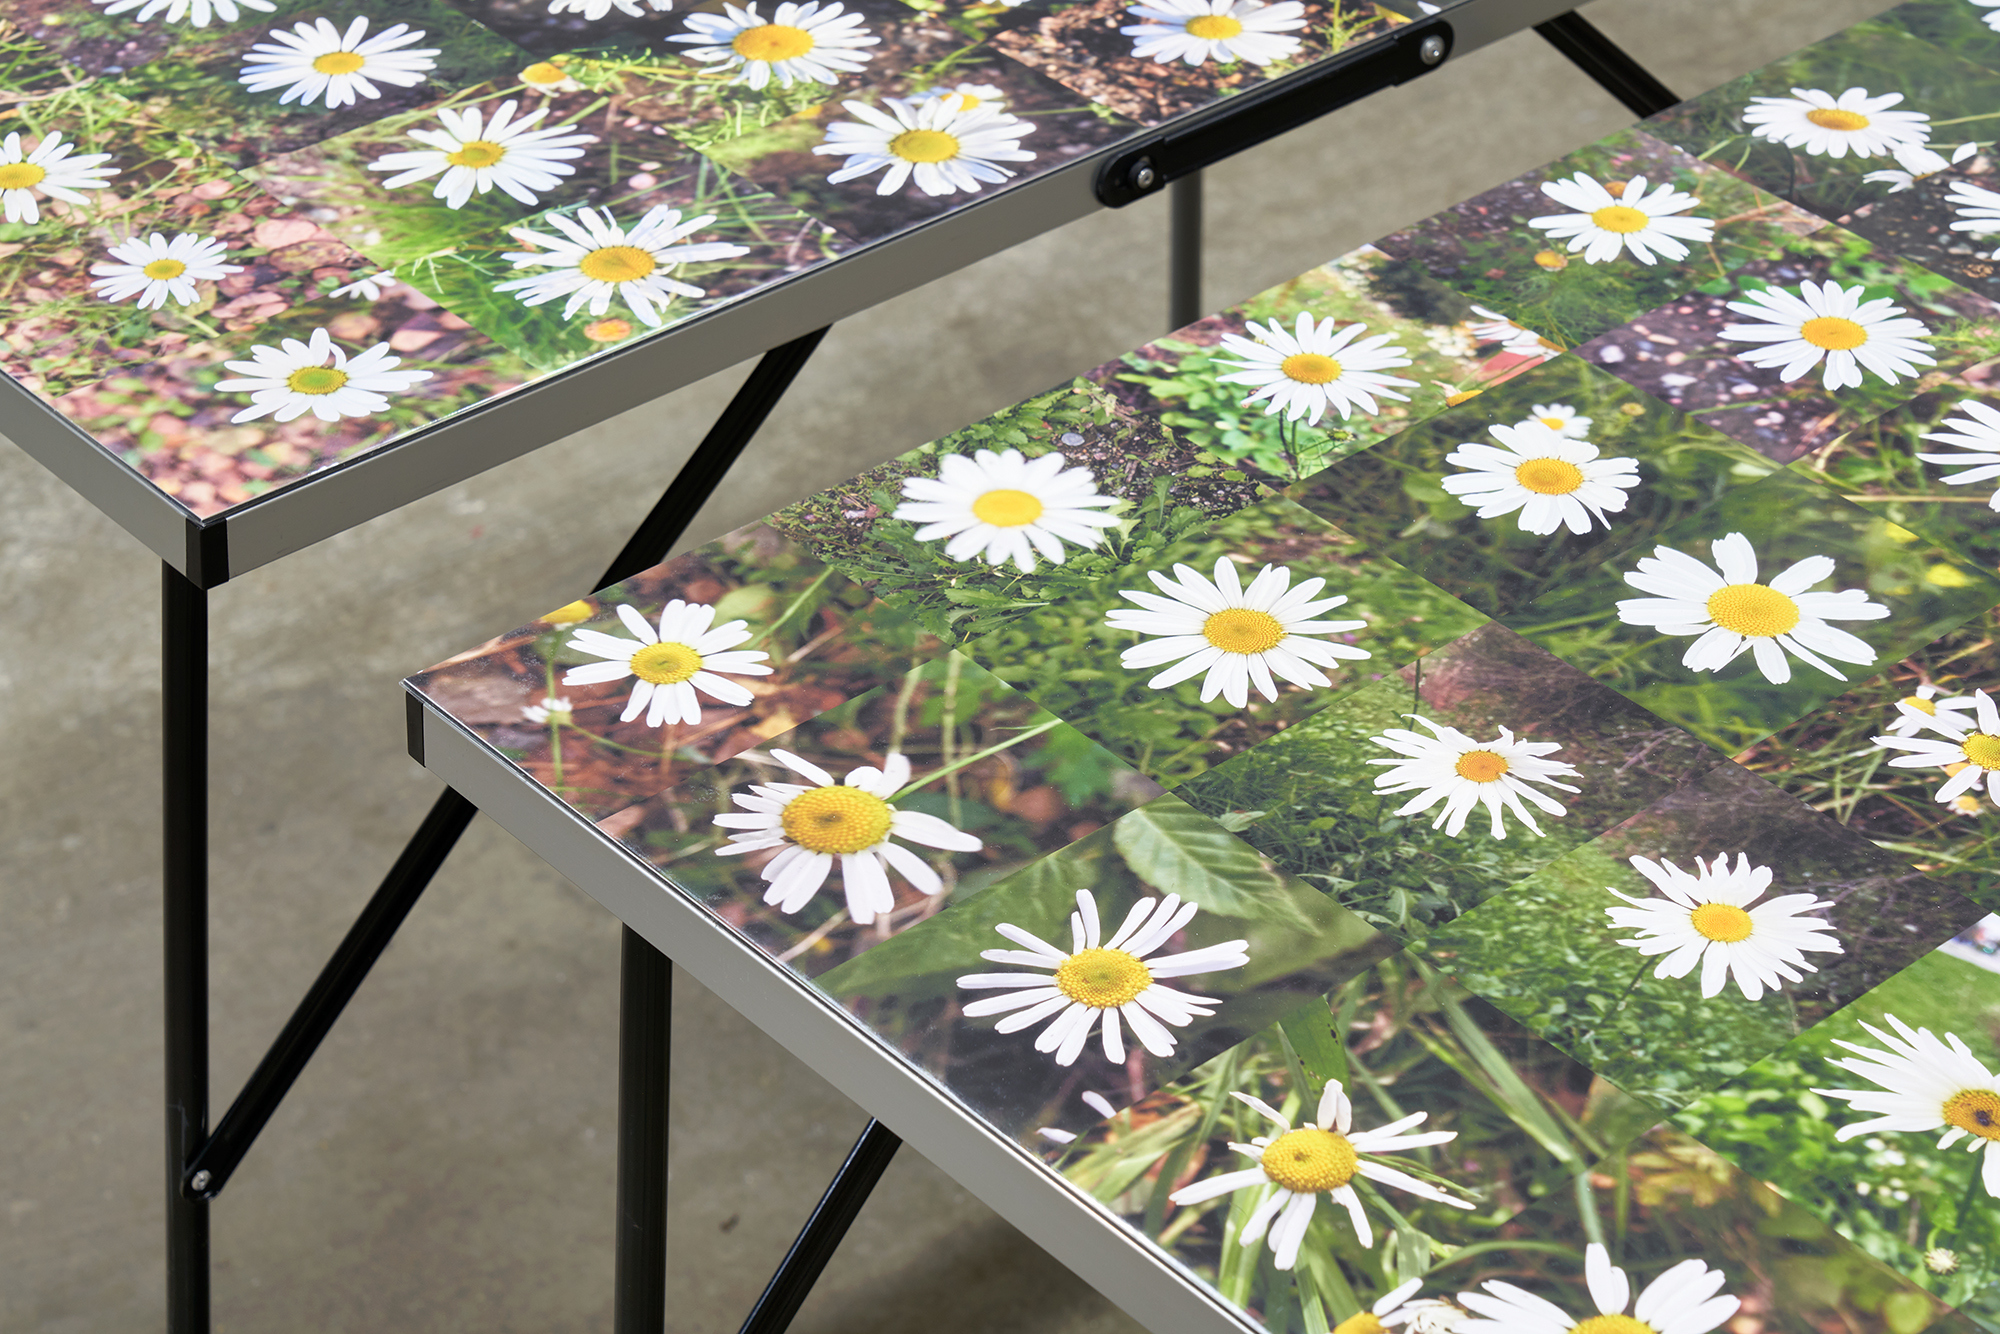 Mikko Kuorinki, Daisy table (1-6), 252 digital photographs of flowers belonging to the daisy family, inkjet prints on archival papers wrapped in protective plastic sheets, foldable tables with adjustable legs, 100 x 60 cm, variable heights.